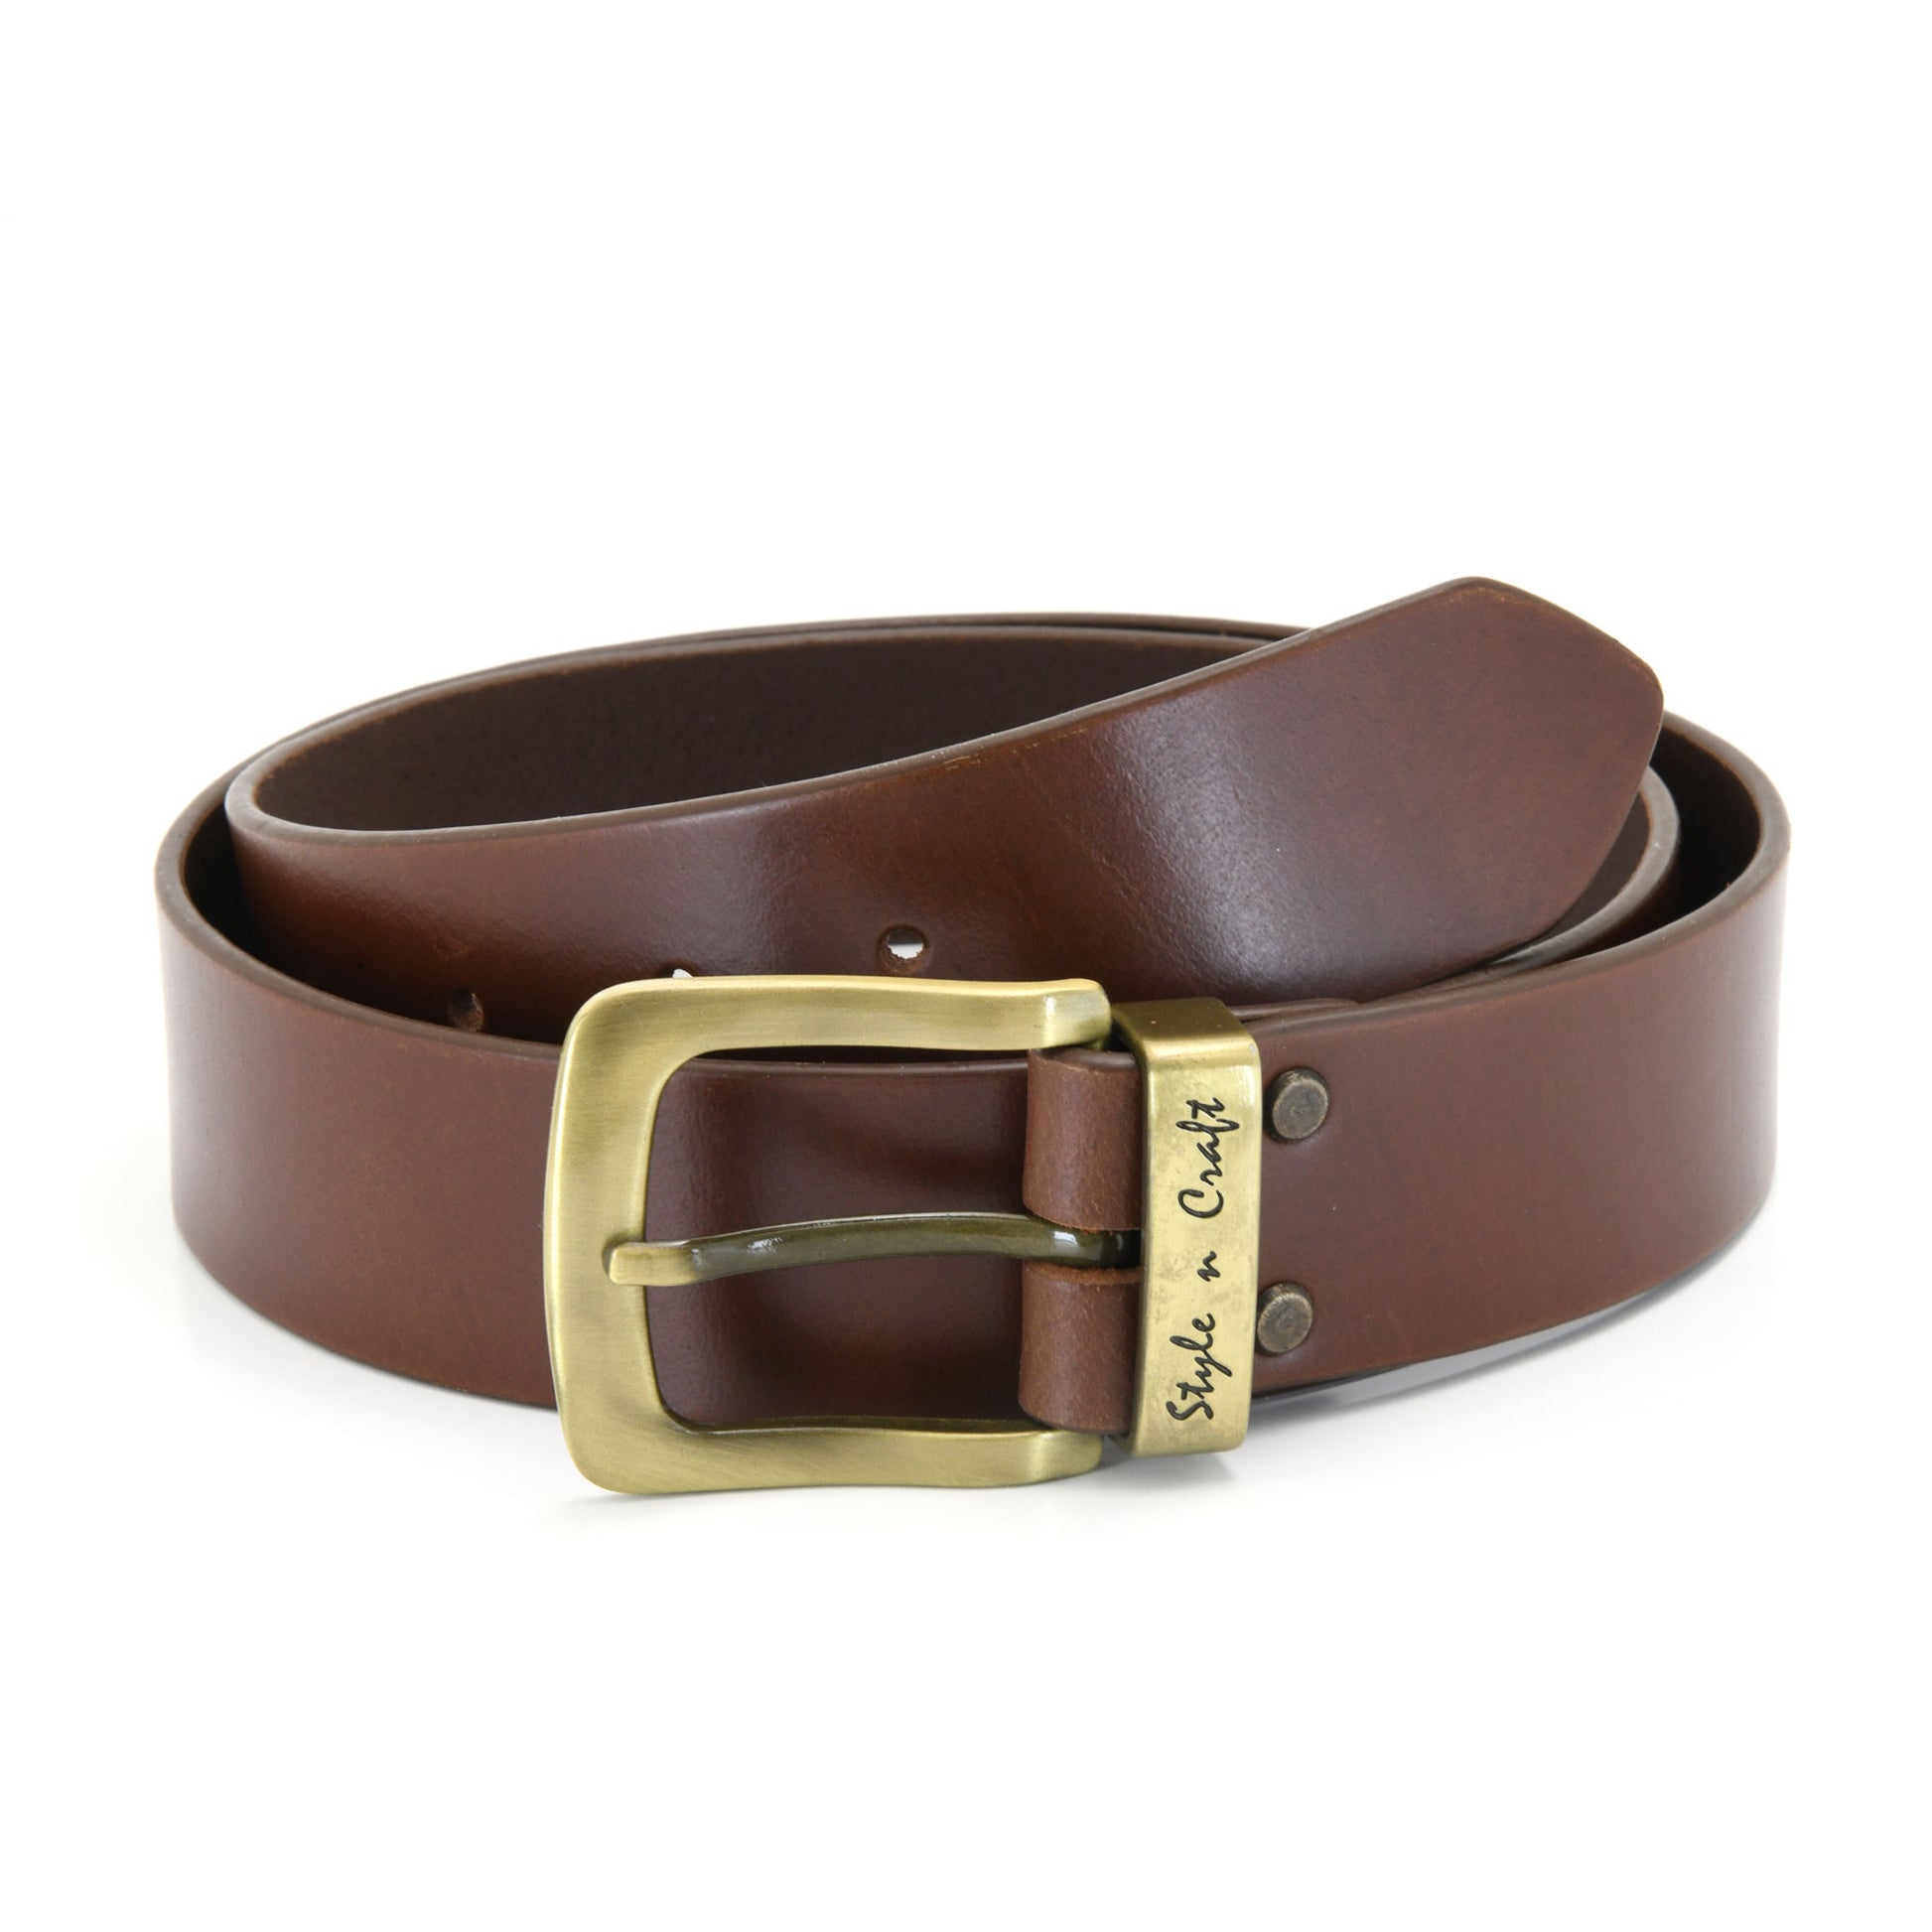 392713 - one and a half inch wide leather belt in dark tan color full grain leather with matte gold finish metal buckle & loop - front view 1